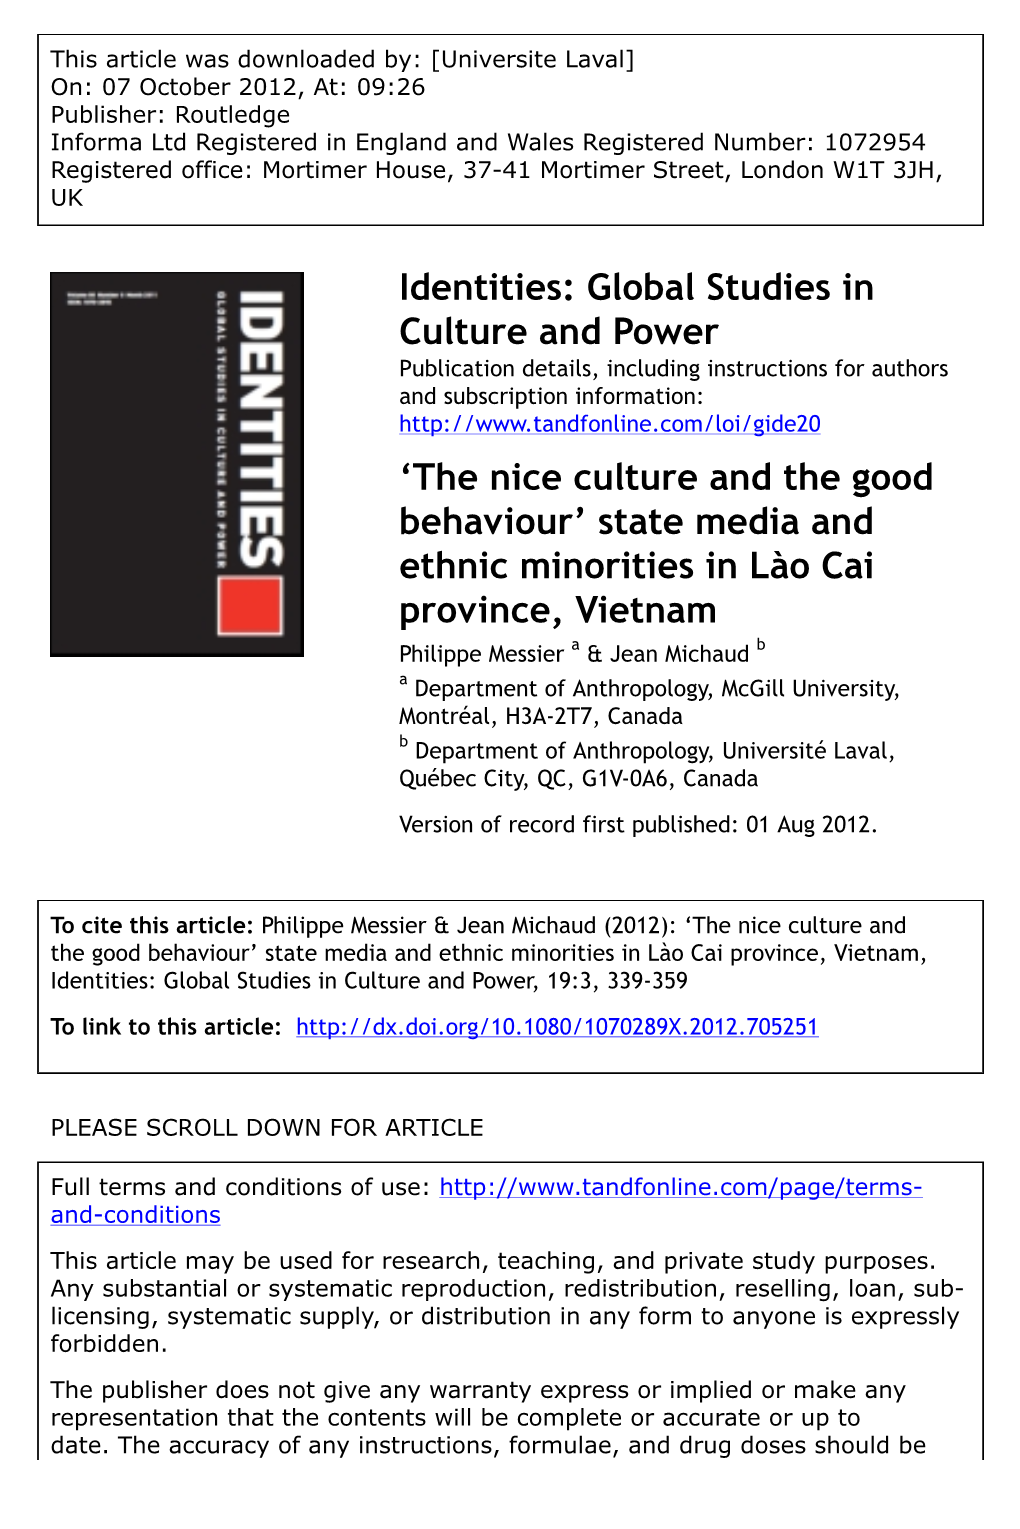 State Media and Ethnic Minorities in Lào Cai Province, Vietnam